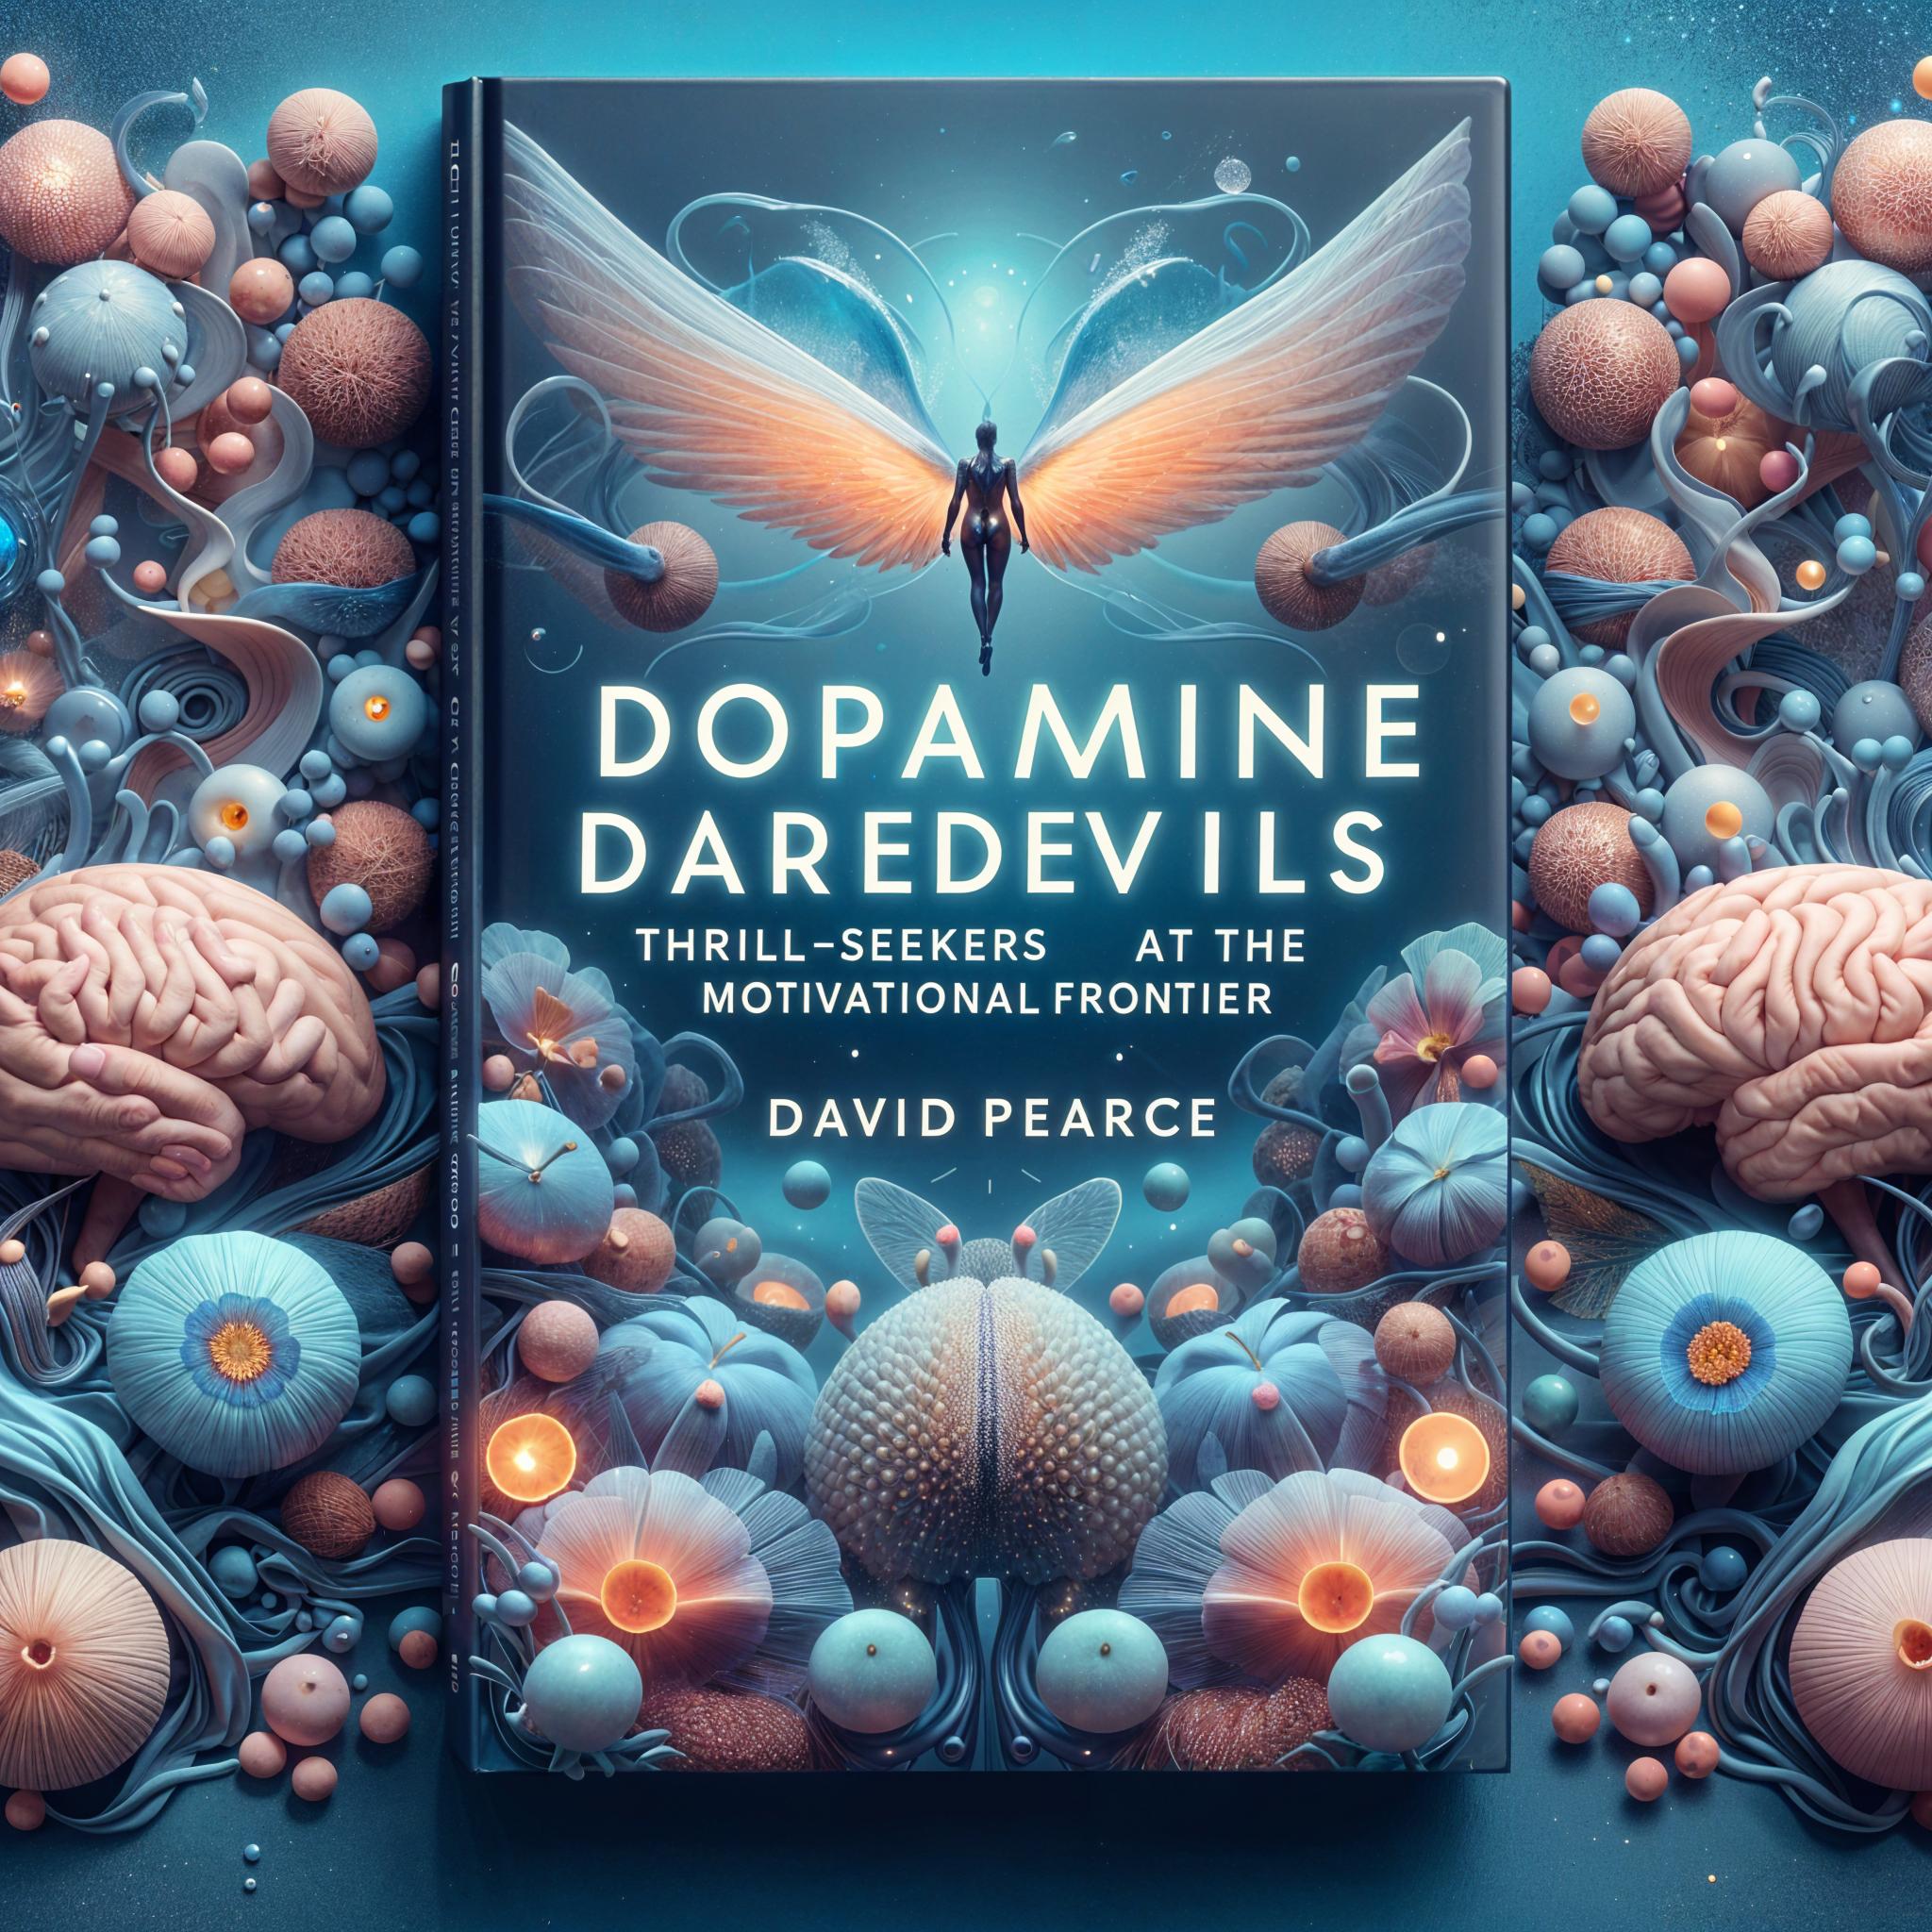 Dopamine Daredevils: Thrill-Seekers at the Motivational Frontier by David Pearce